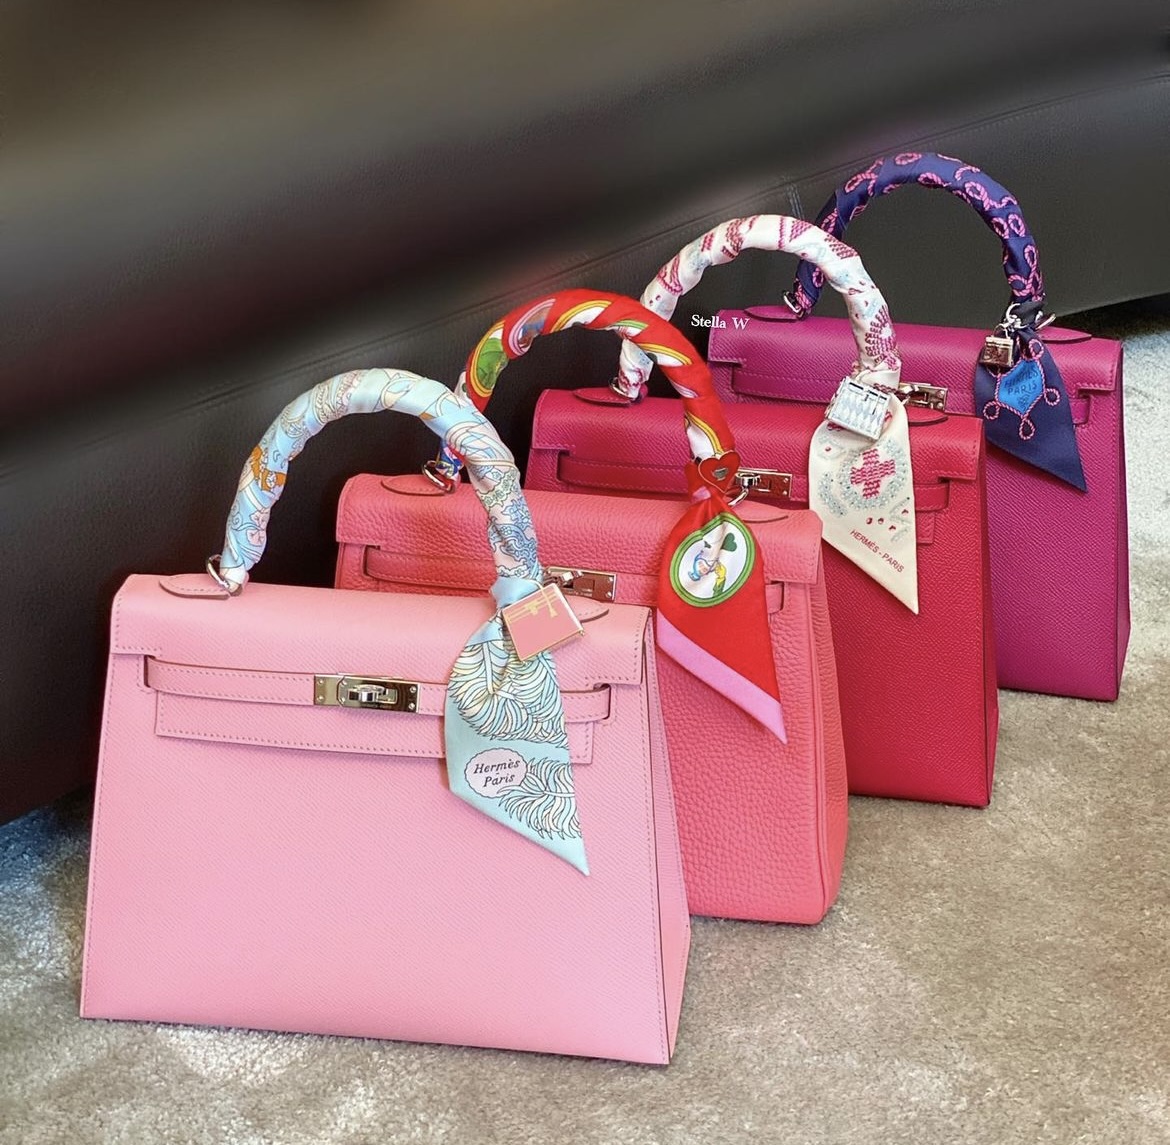 Why Does Hermès Produce Pink Bags With Palladium Hardware Instead of Gold  Hardware?